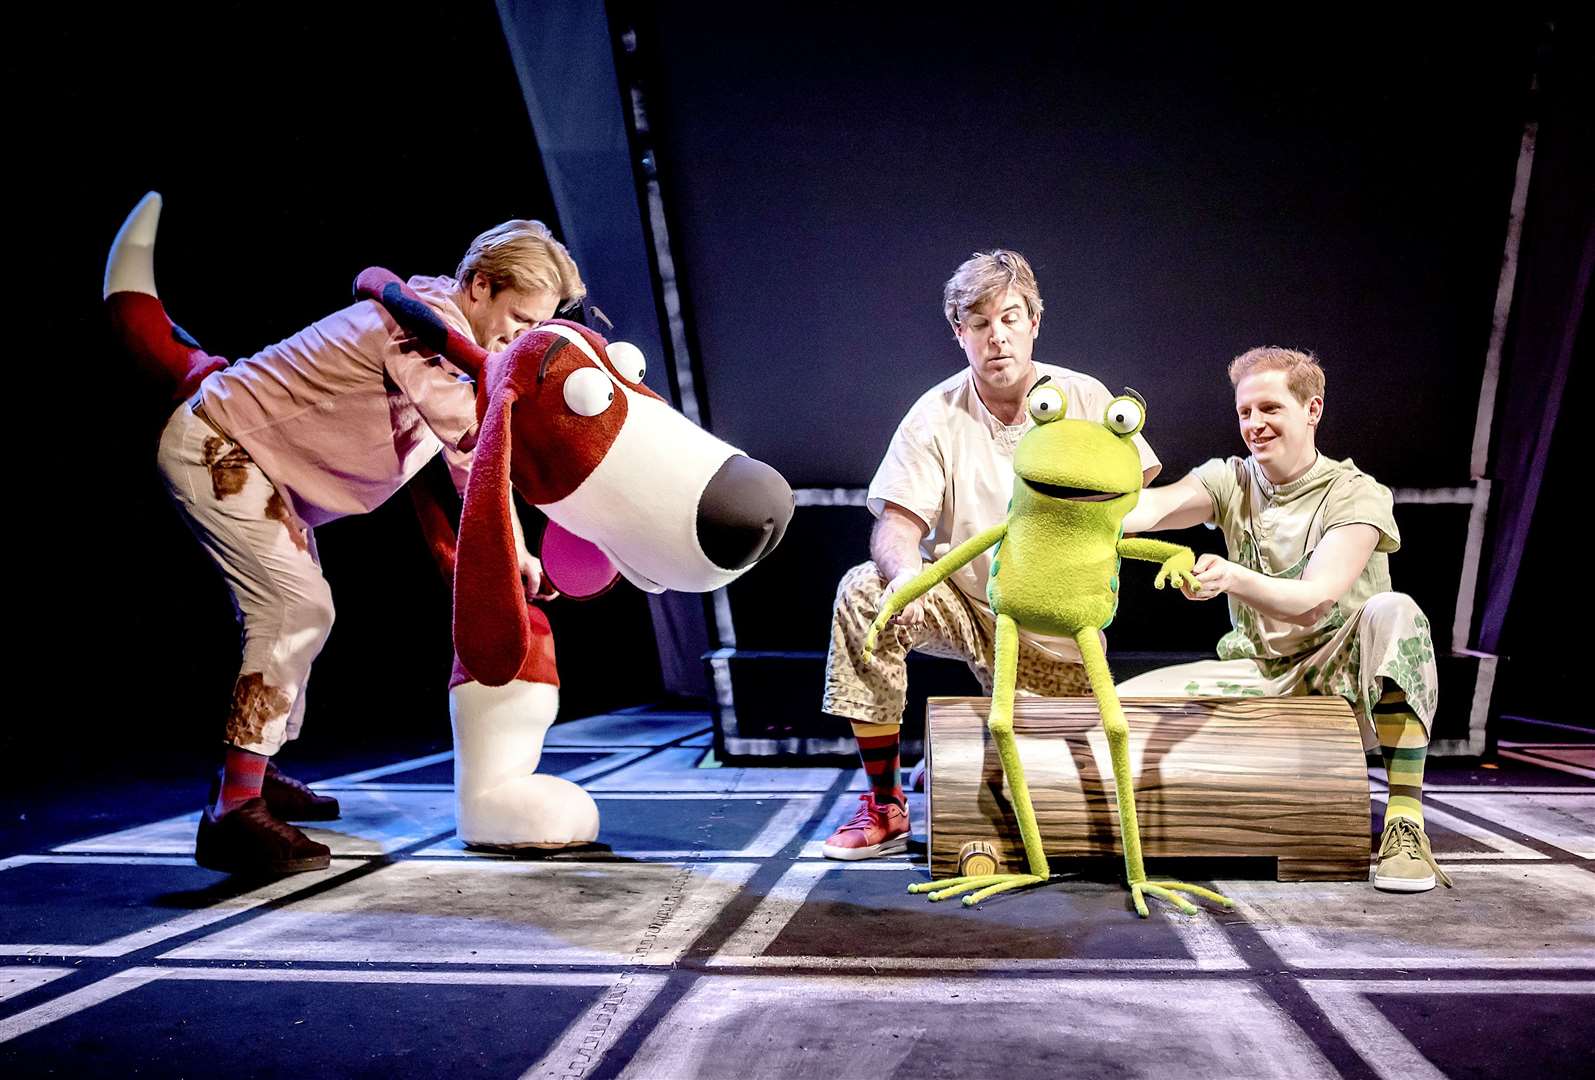 Oi Frog and Friends is coming to The Orchard Theatre